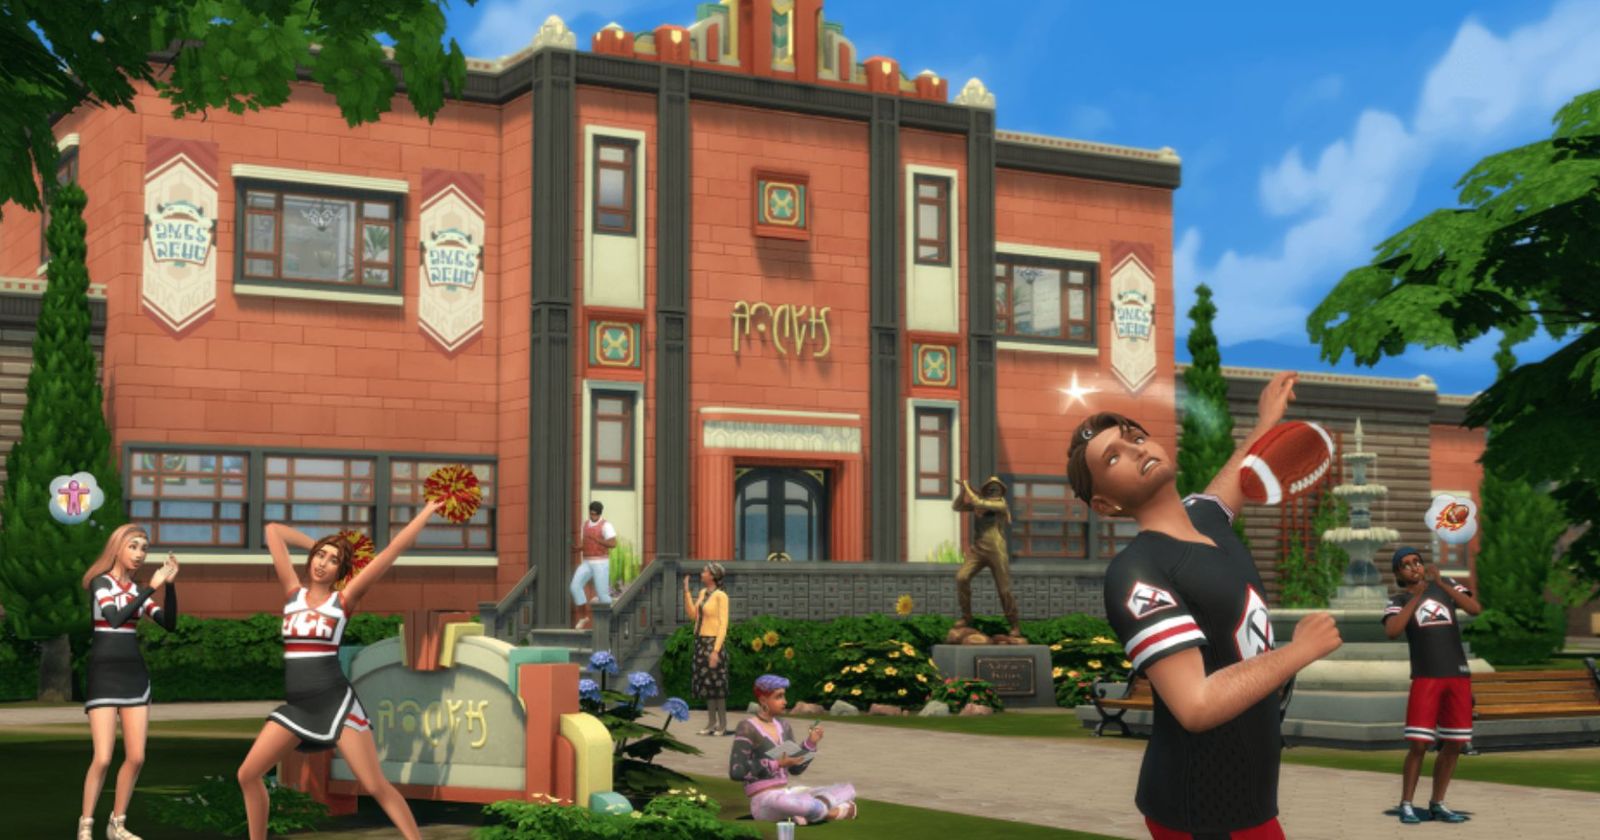 The next Sims 4 expansion might have leaked